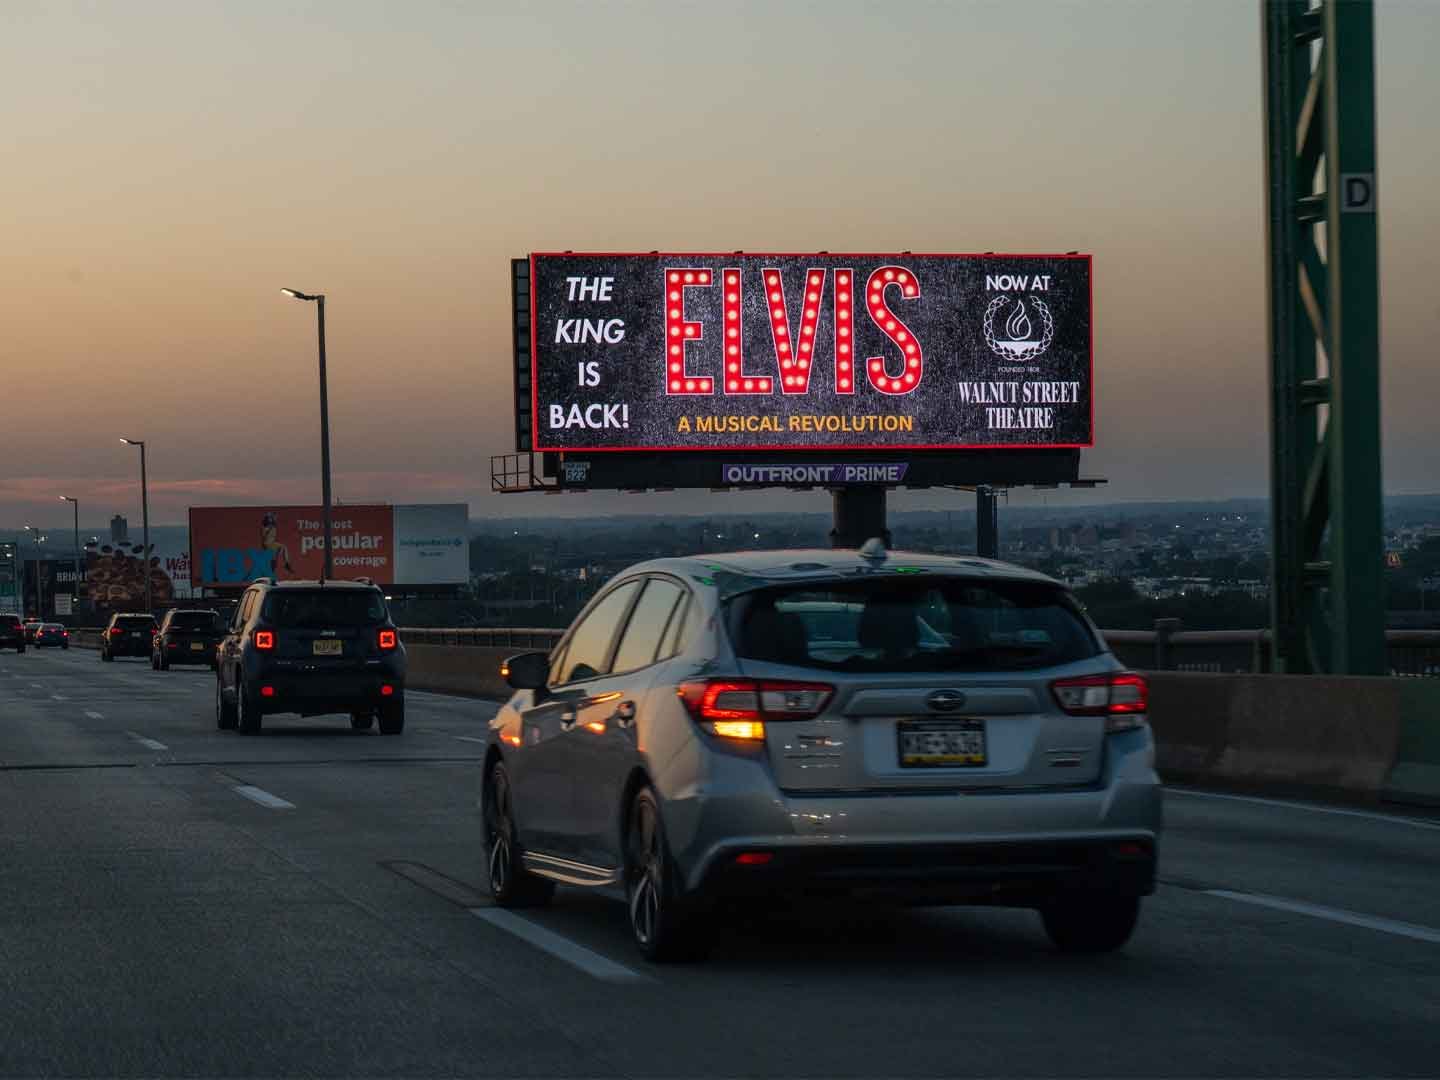 out of home billboard advertising philly elvis